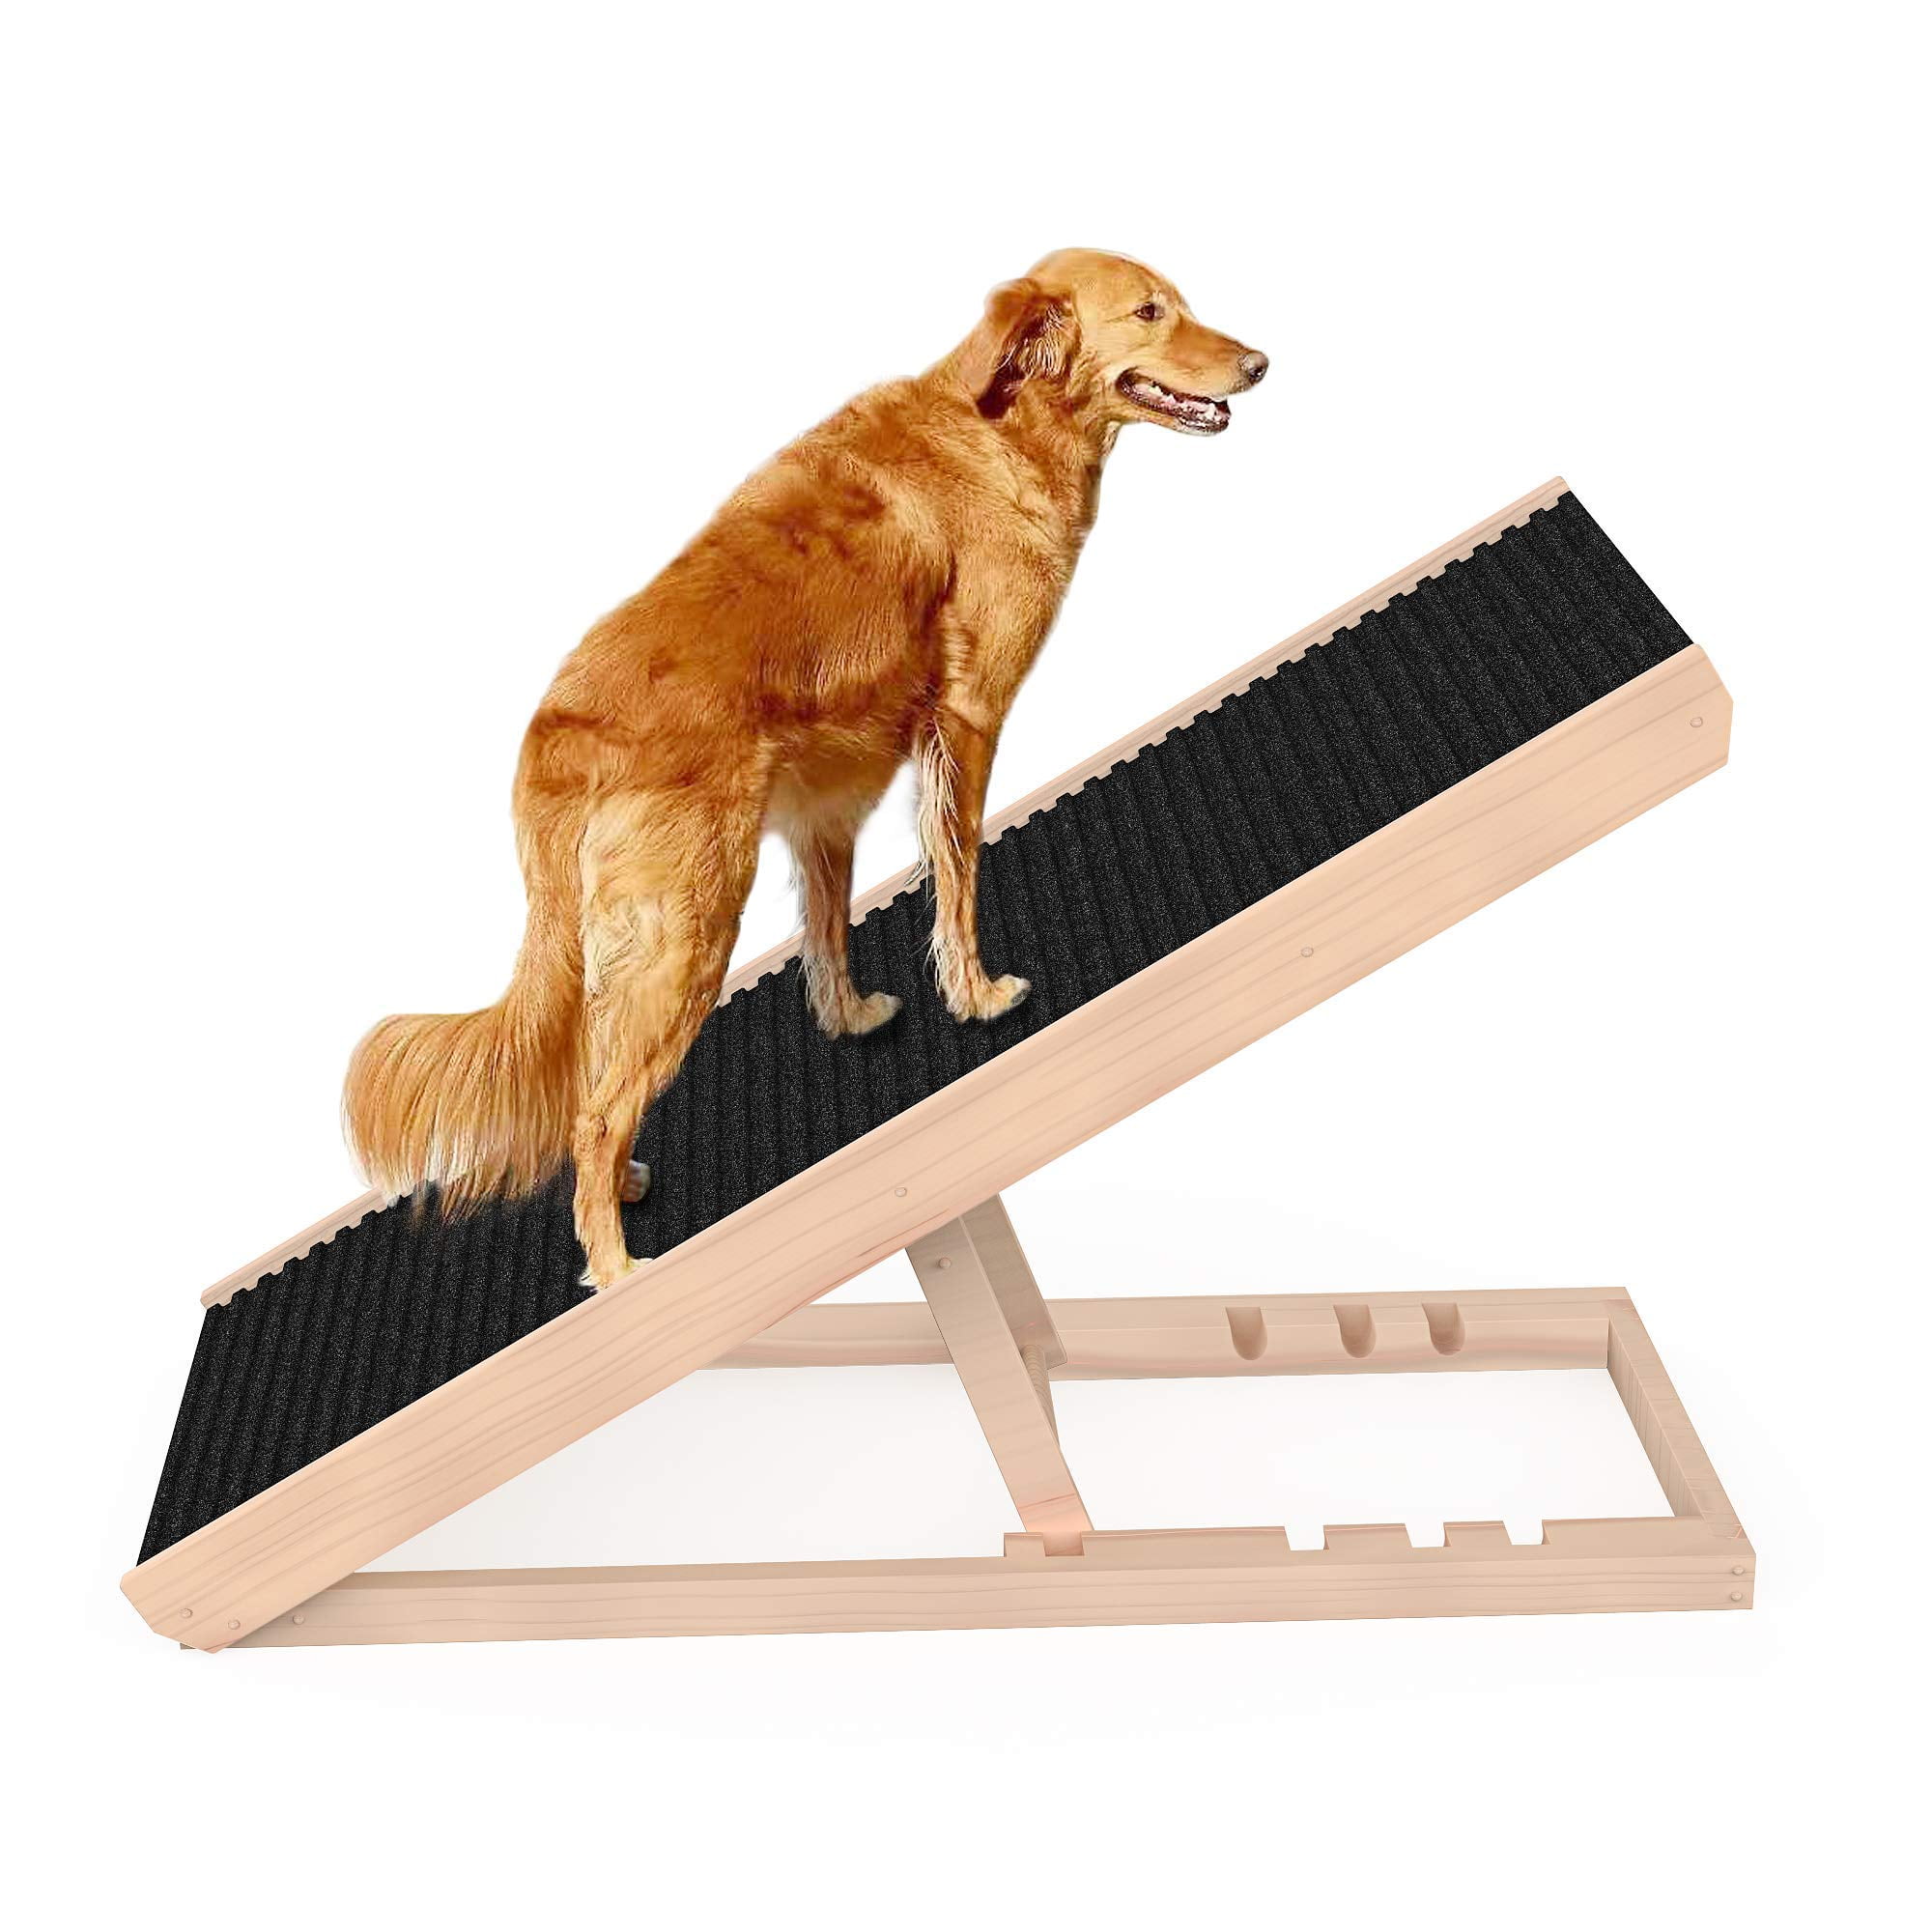 Non Slip Carpet Surface Holds Up to 230lb 40 Long and Height Adjustable from 12” to 24” NAMEE Adjustable Pet Ramp for All Dogs and Cats for Couch or Bed with Paw Traction Mat 